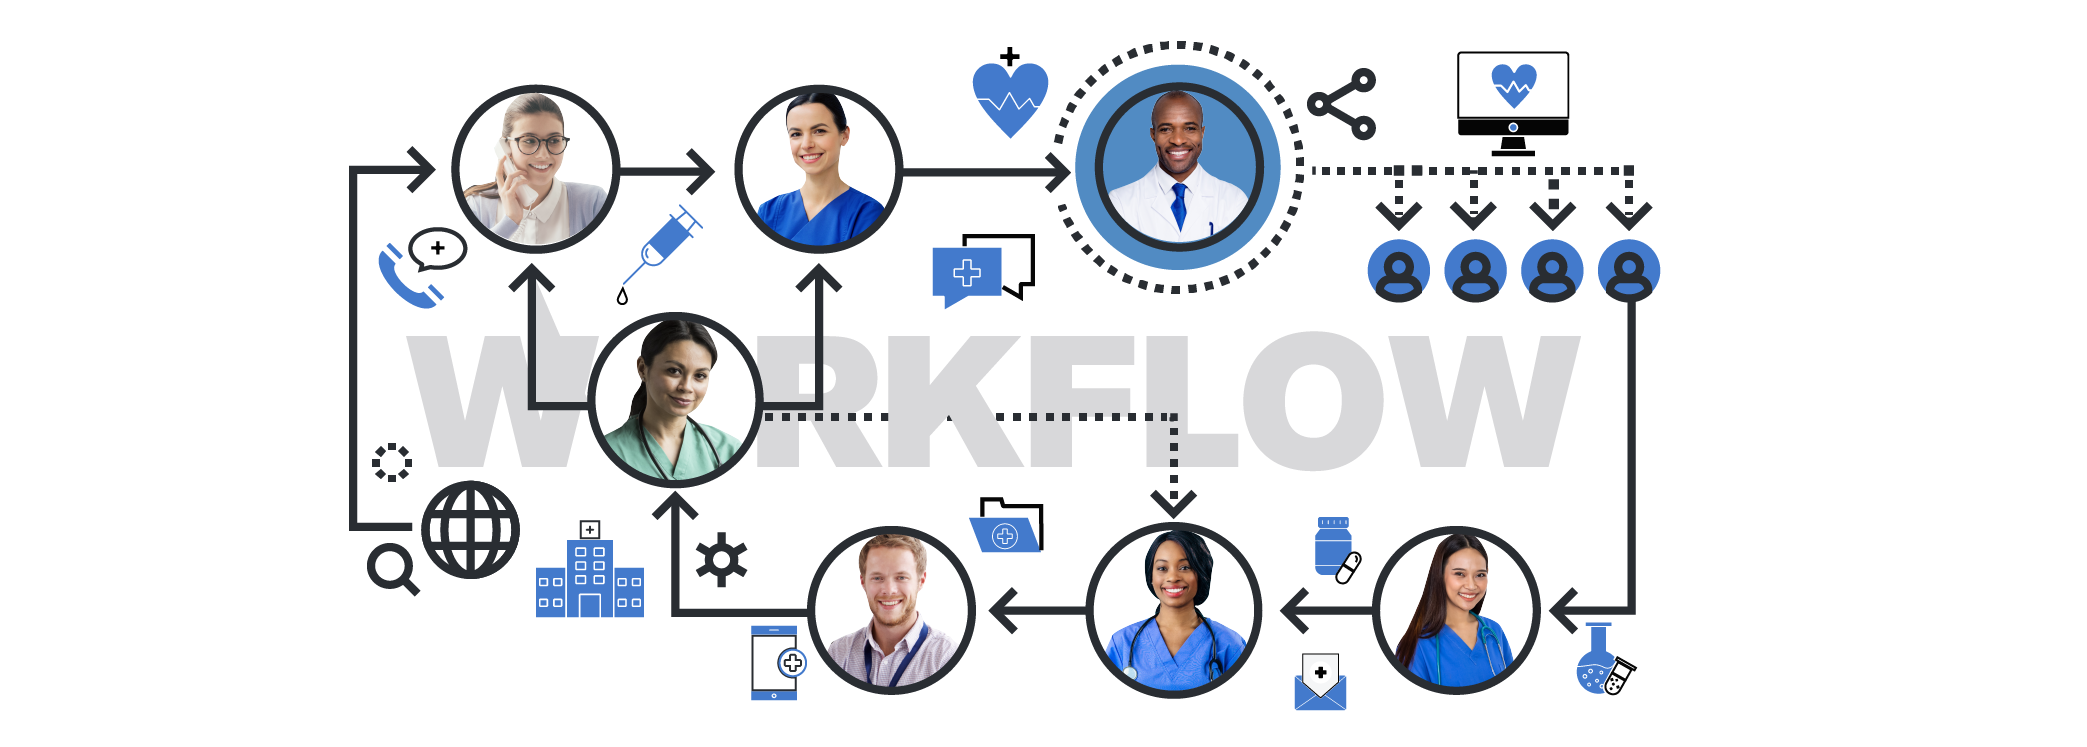 Healthcare workflow different units include in the process: receptionist, non-intensive care, labs